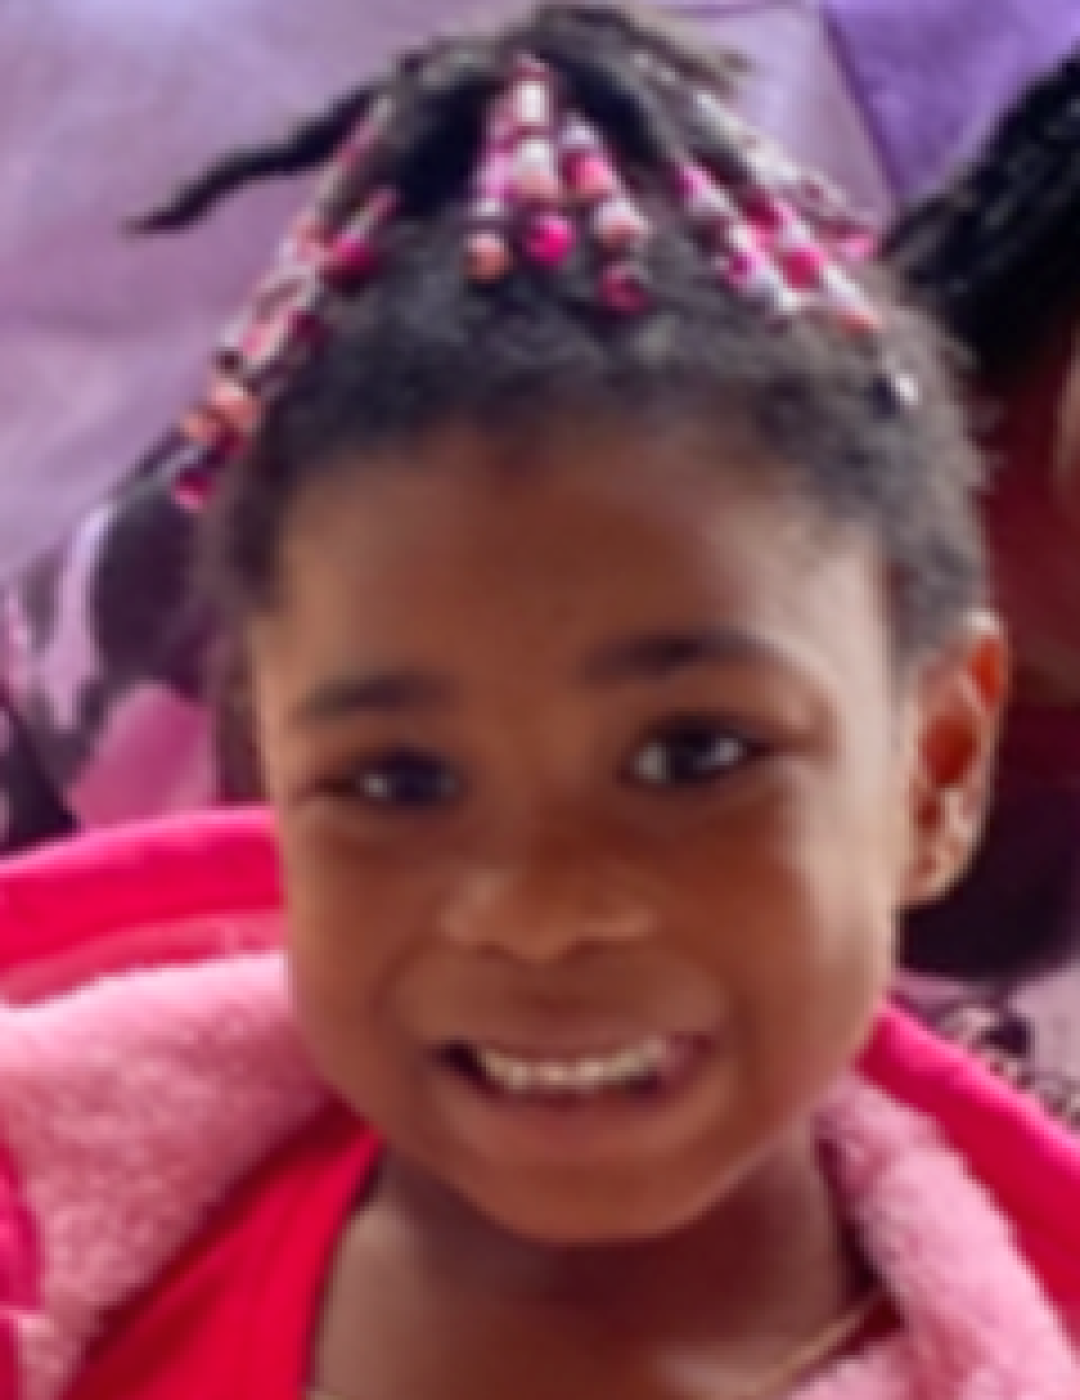 Thailynn Carter. Missing child with black hair, brown eyes, and braids.